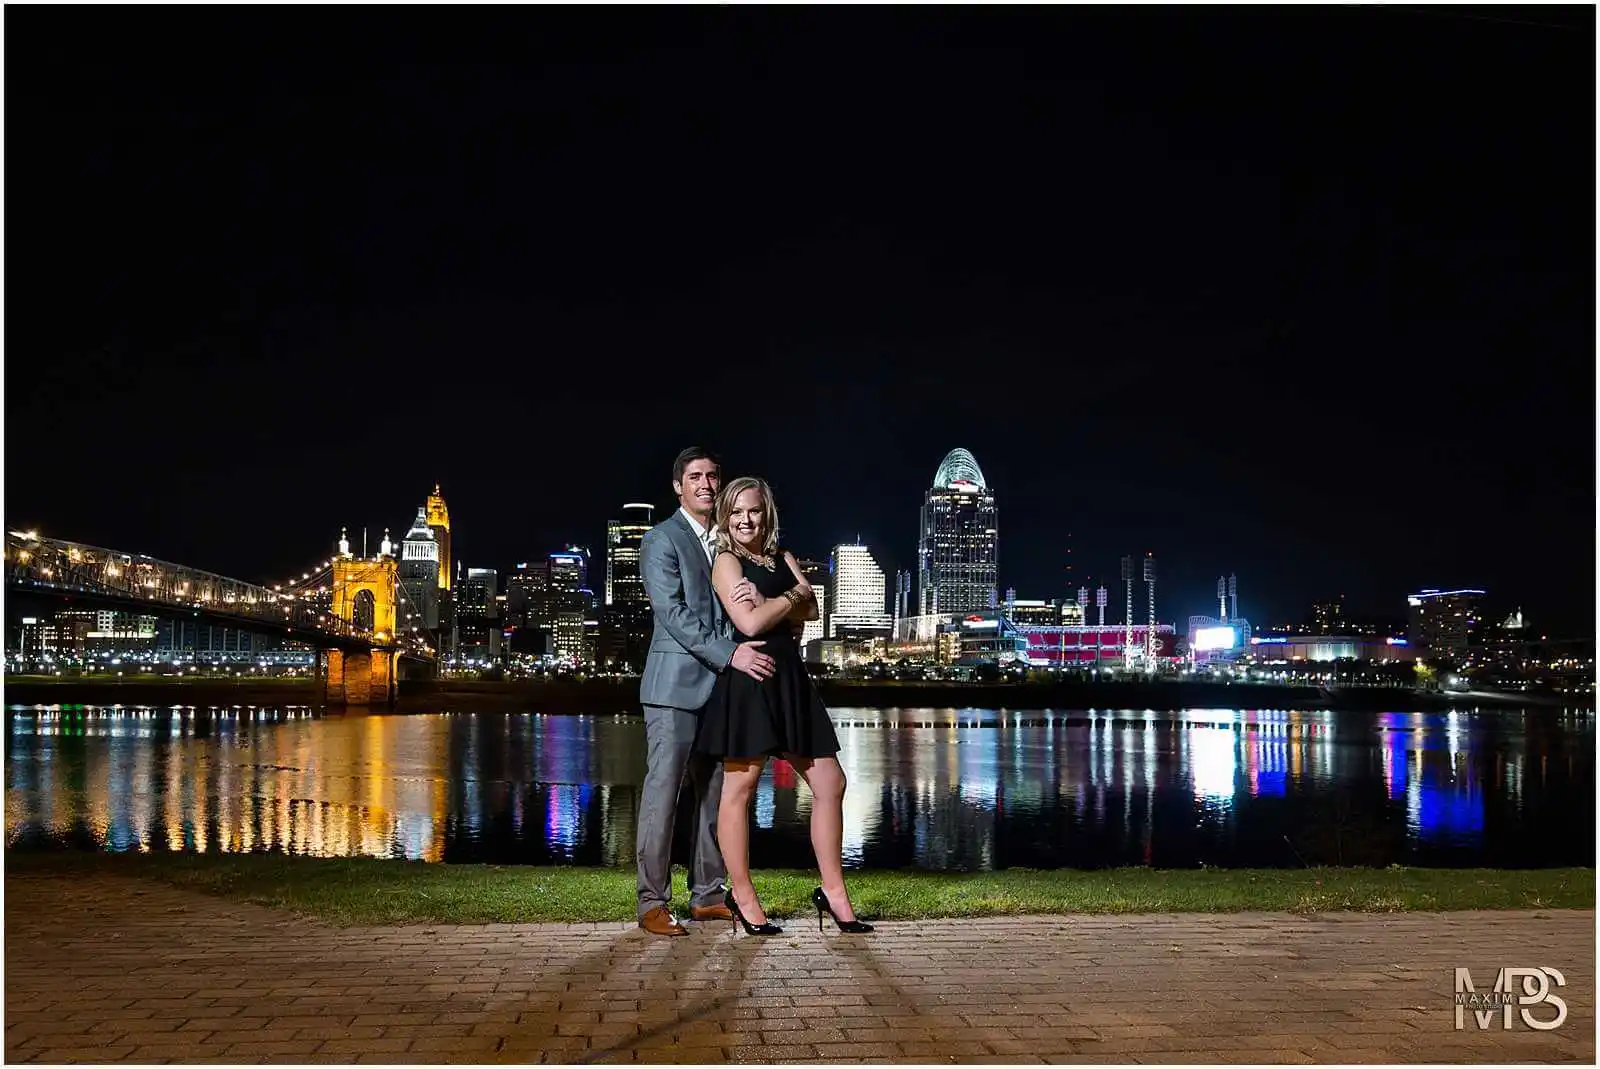 Romantic couple embracing during a nighttime cityscape photoshoot.